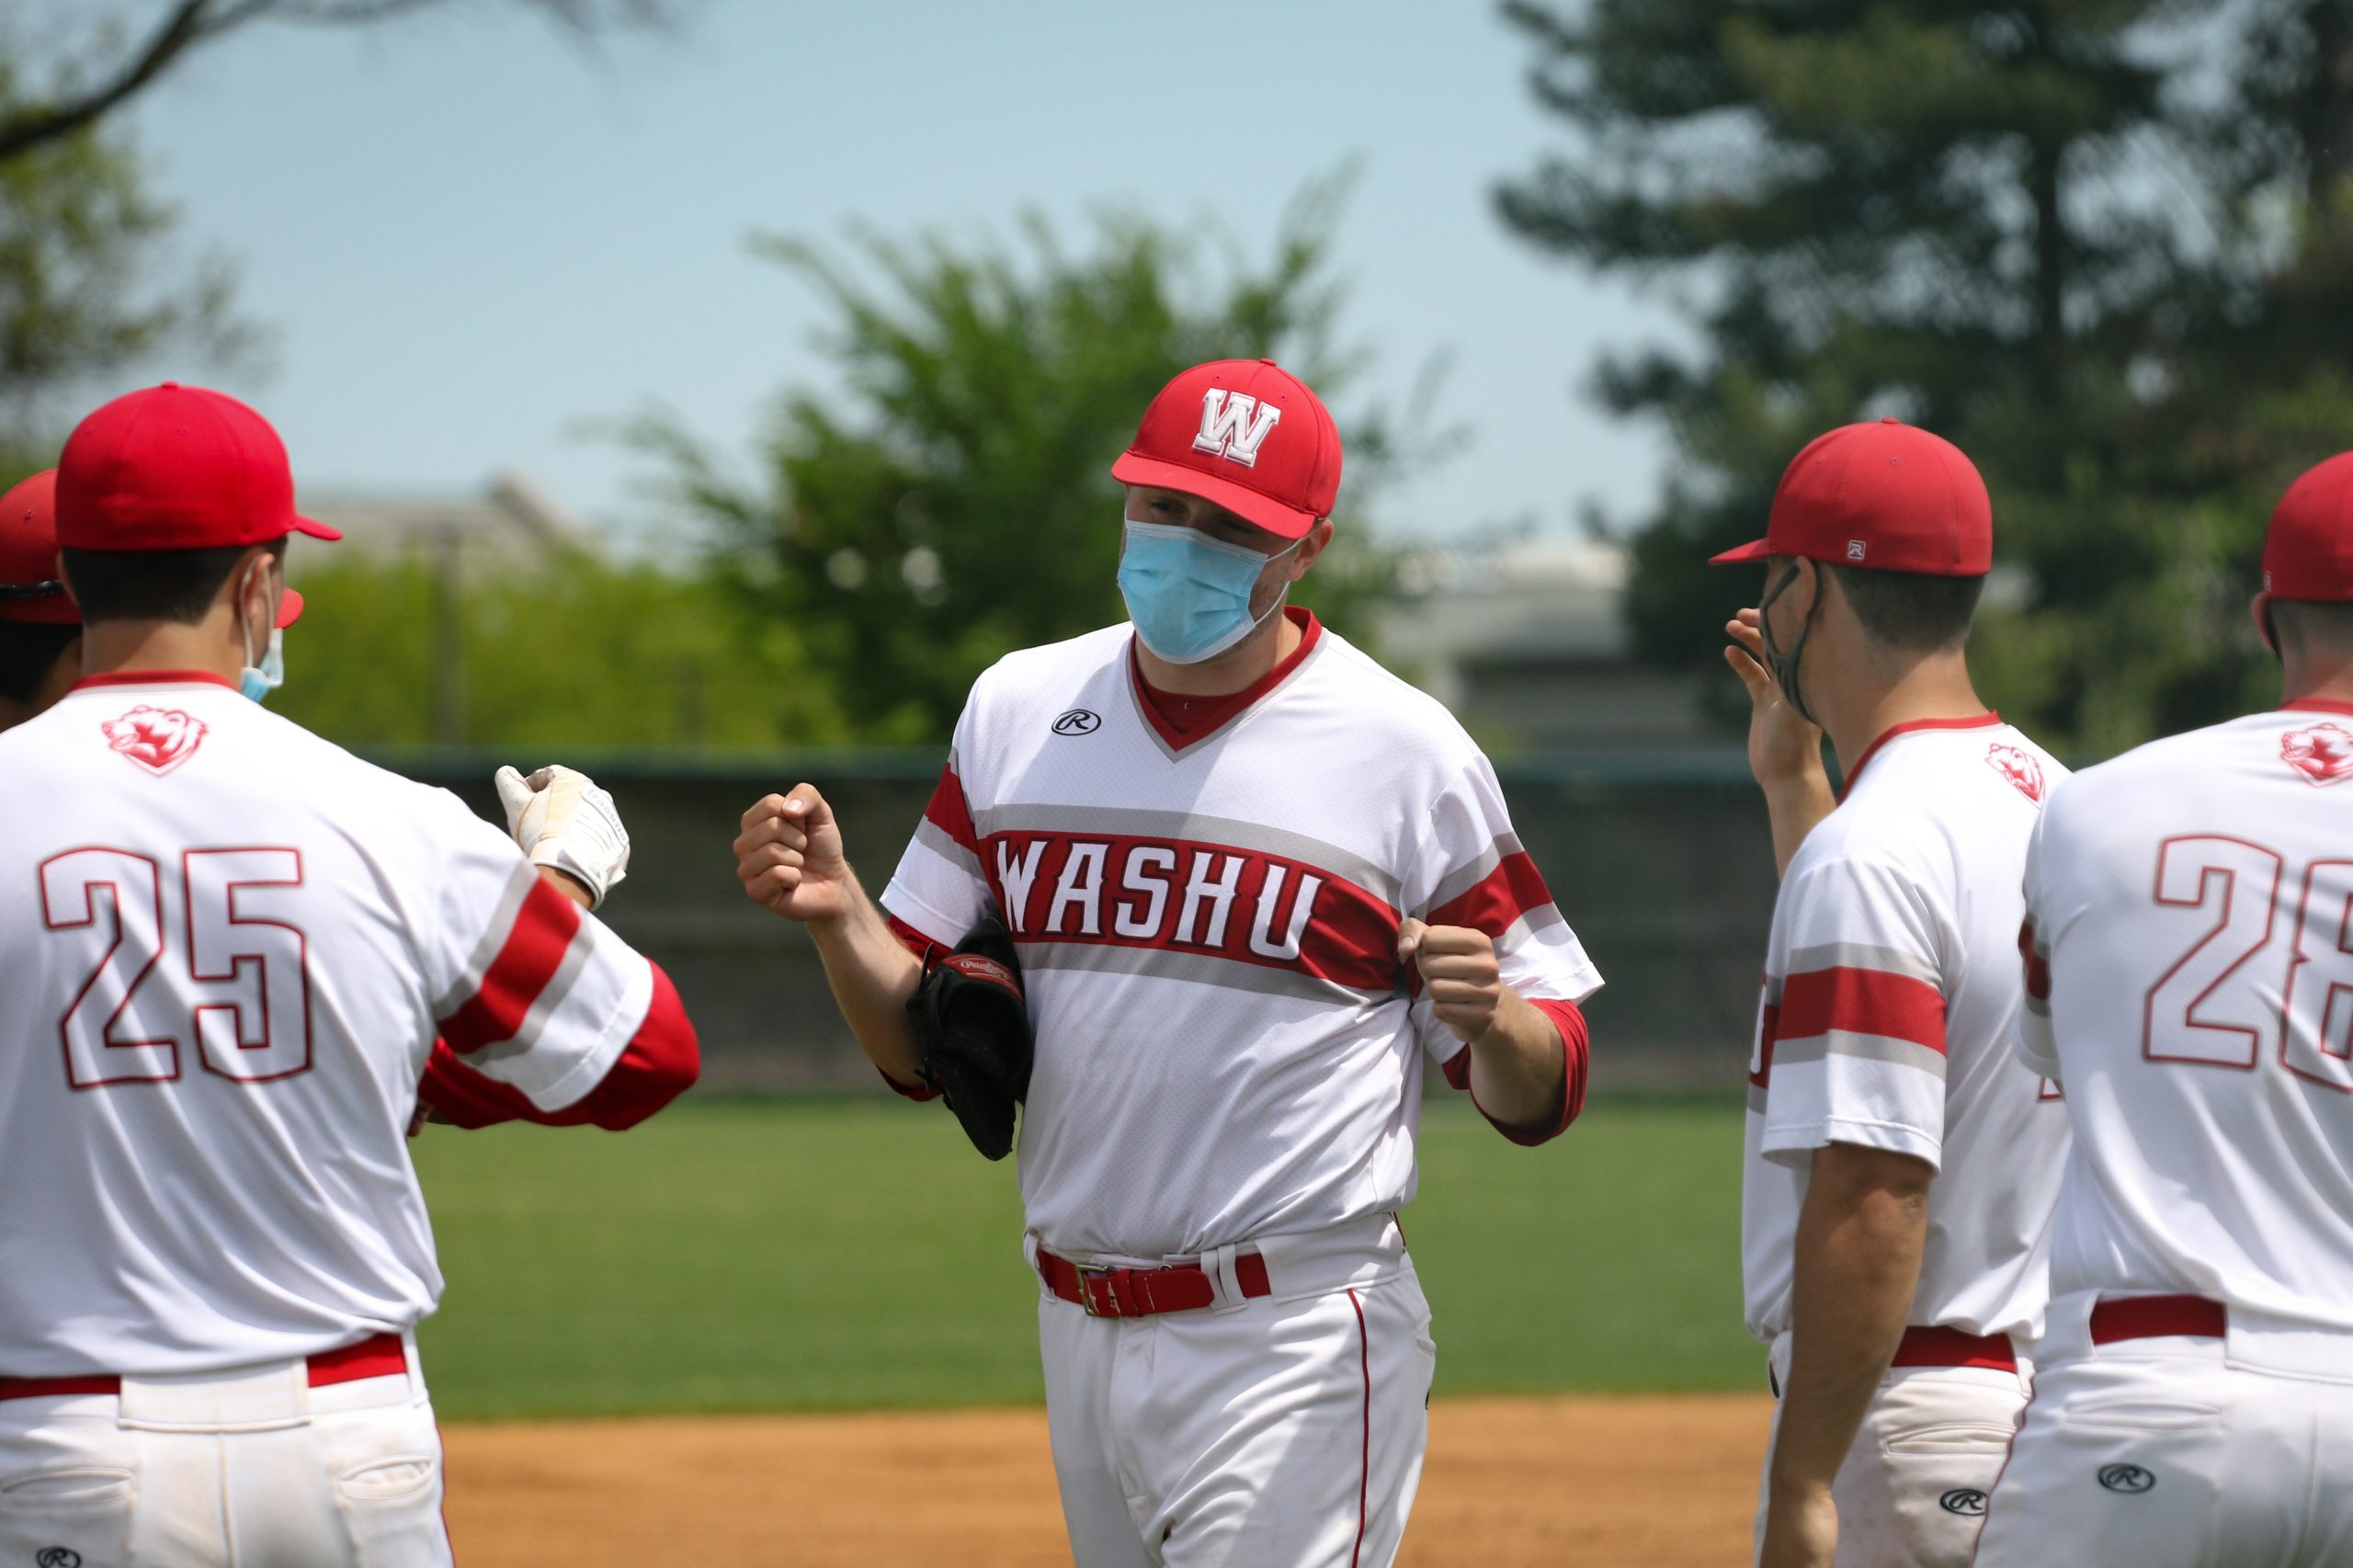 A player wearing a white and red uniform with a red cap, blue face mask and "WashU" written across the front of the shirt fist bumps two other players.